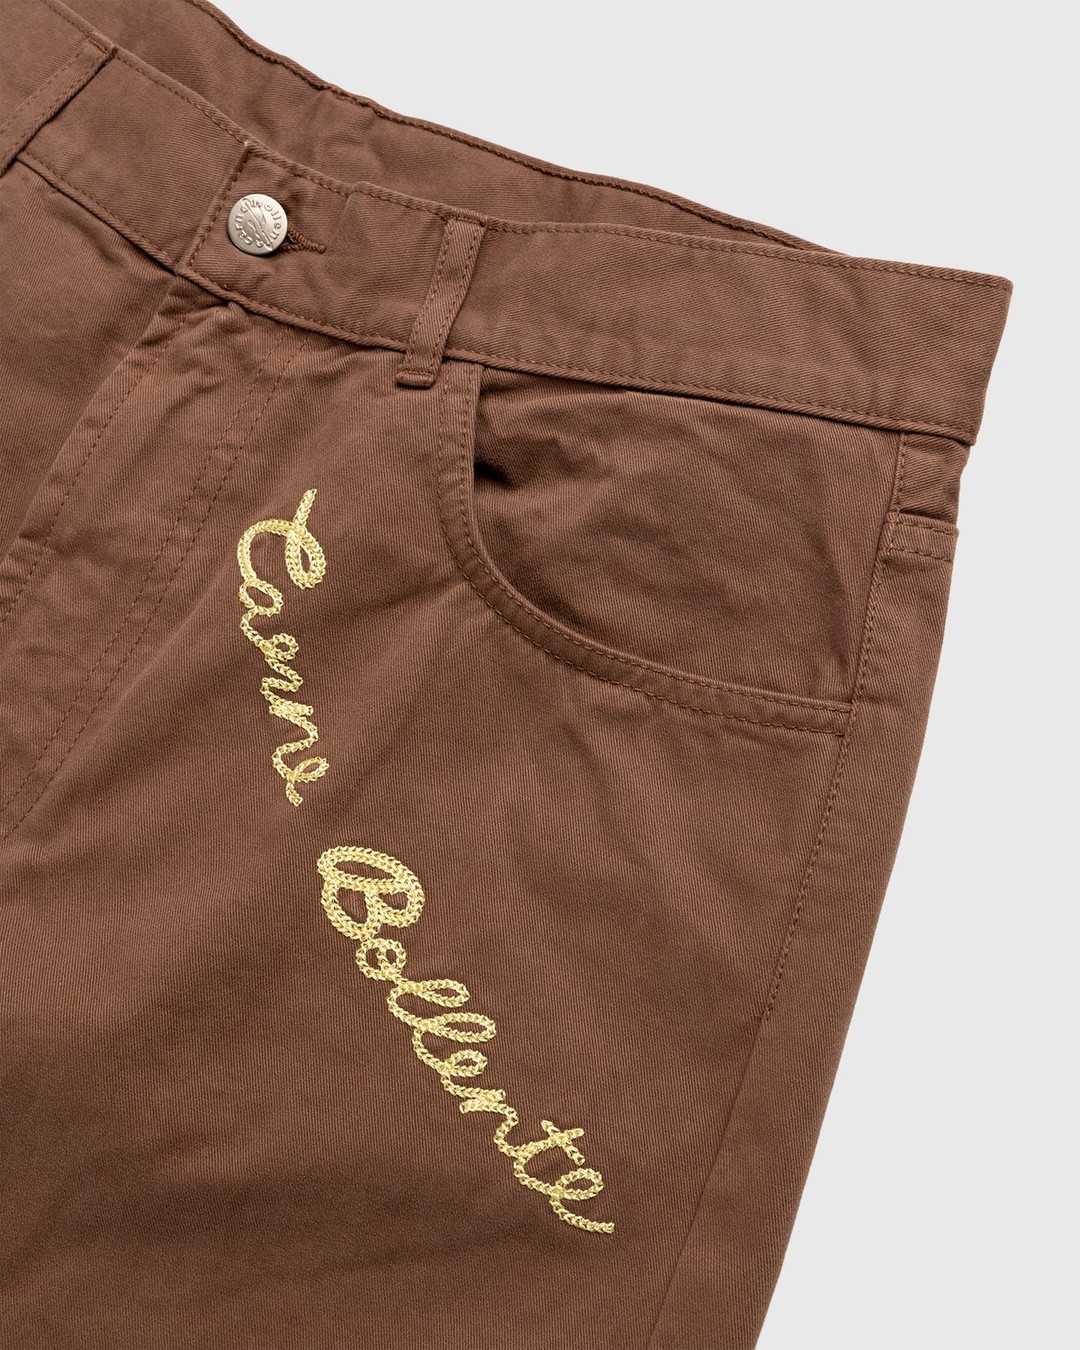 Carne Bollente – The Back Bump Trouser Brown - Pants - Brown - Image 3